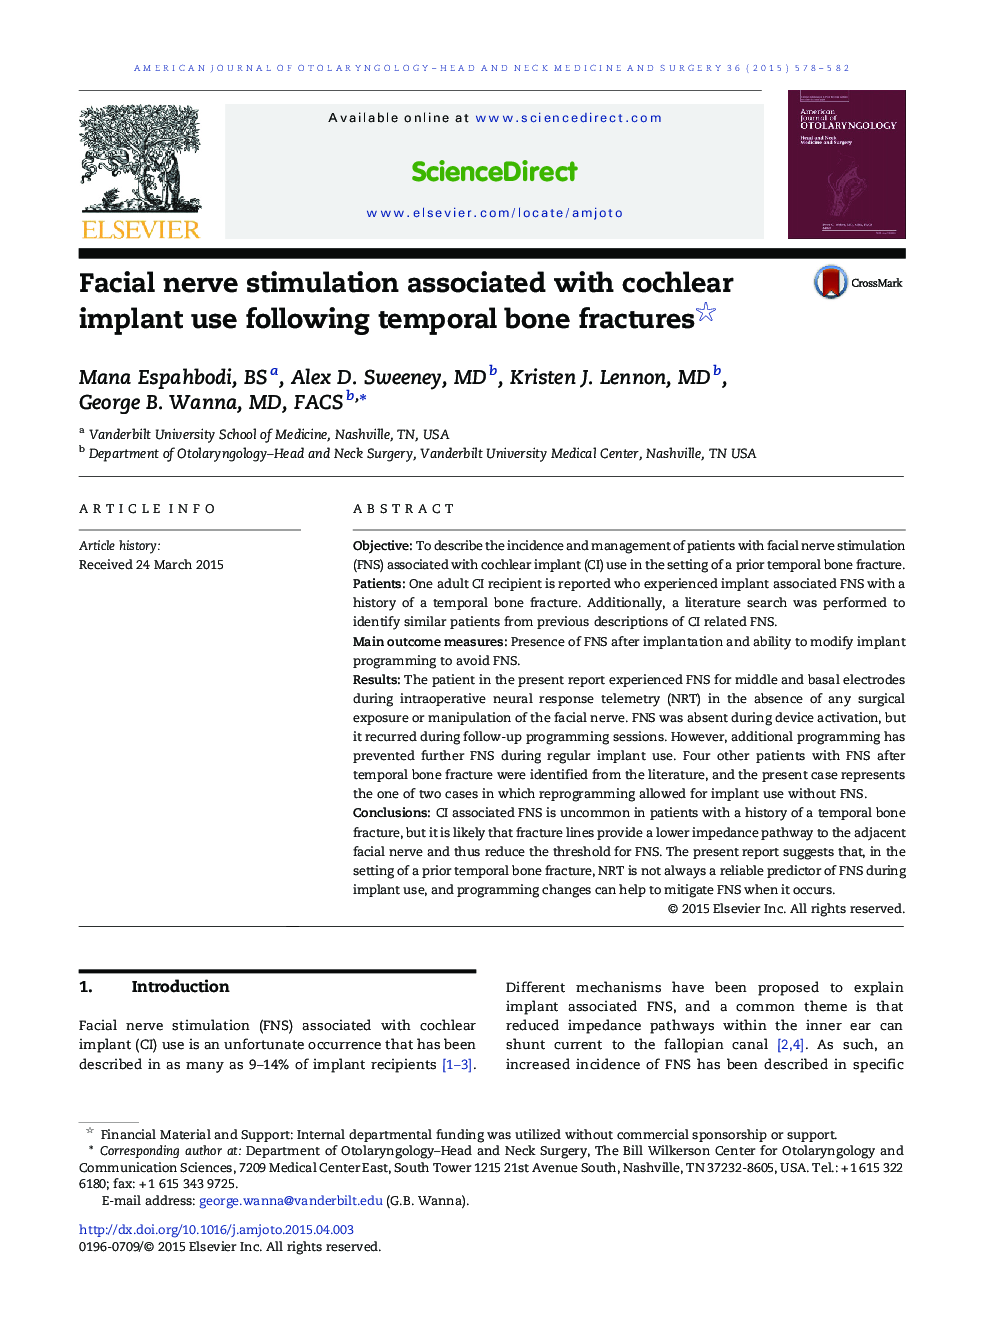 Facial nerve stimulation associated with cochlear implant use following temporal bone fractures 